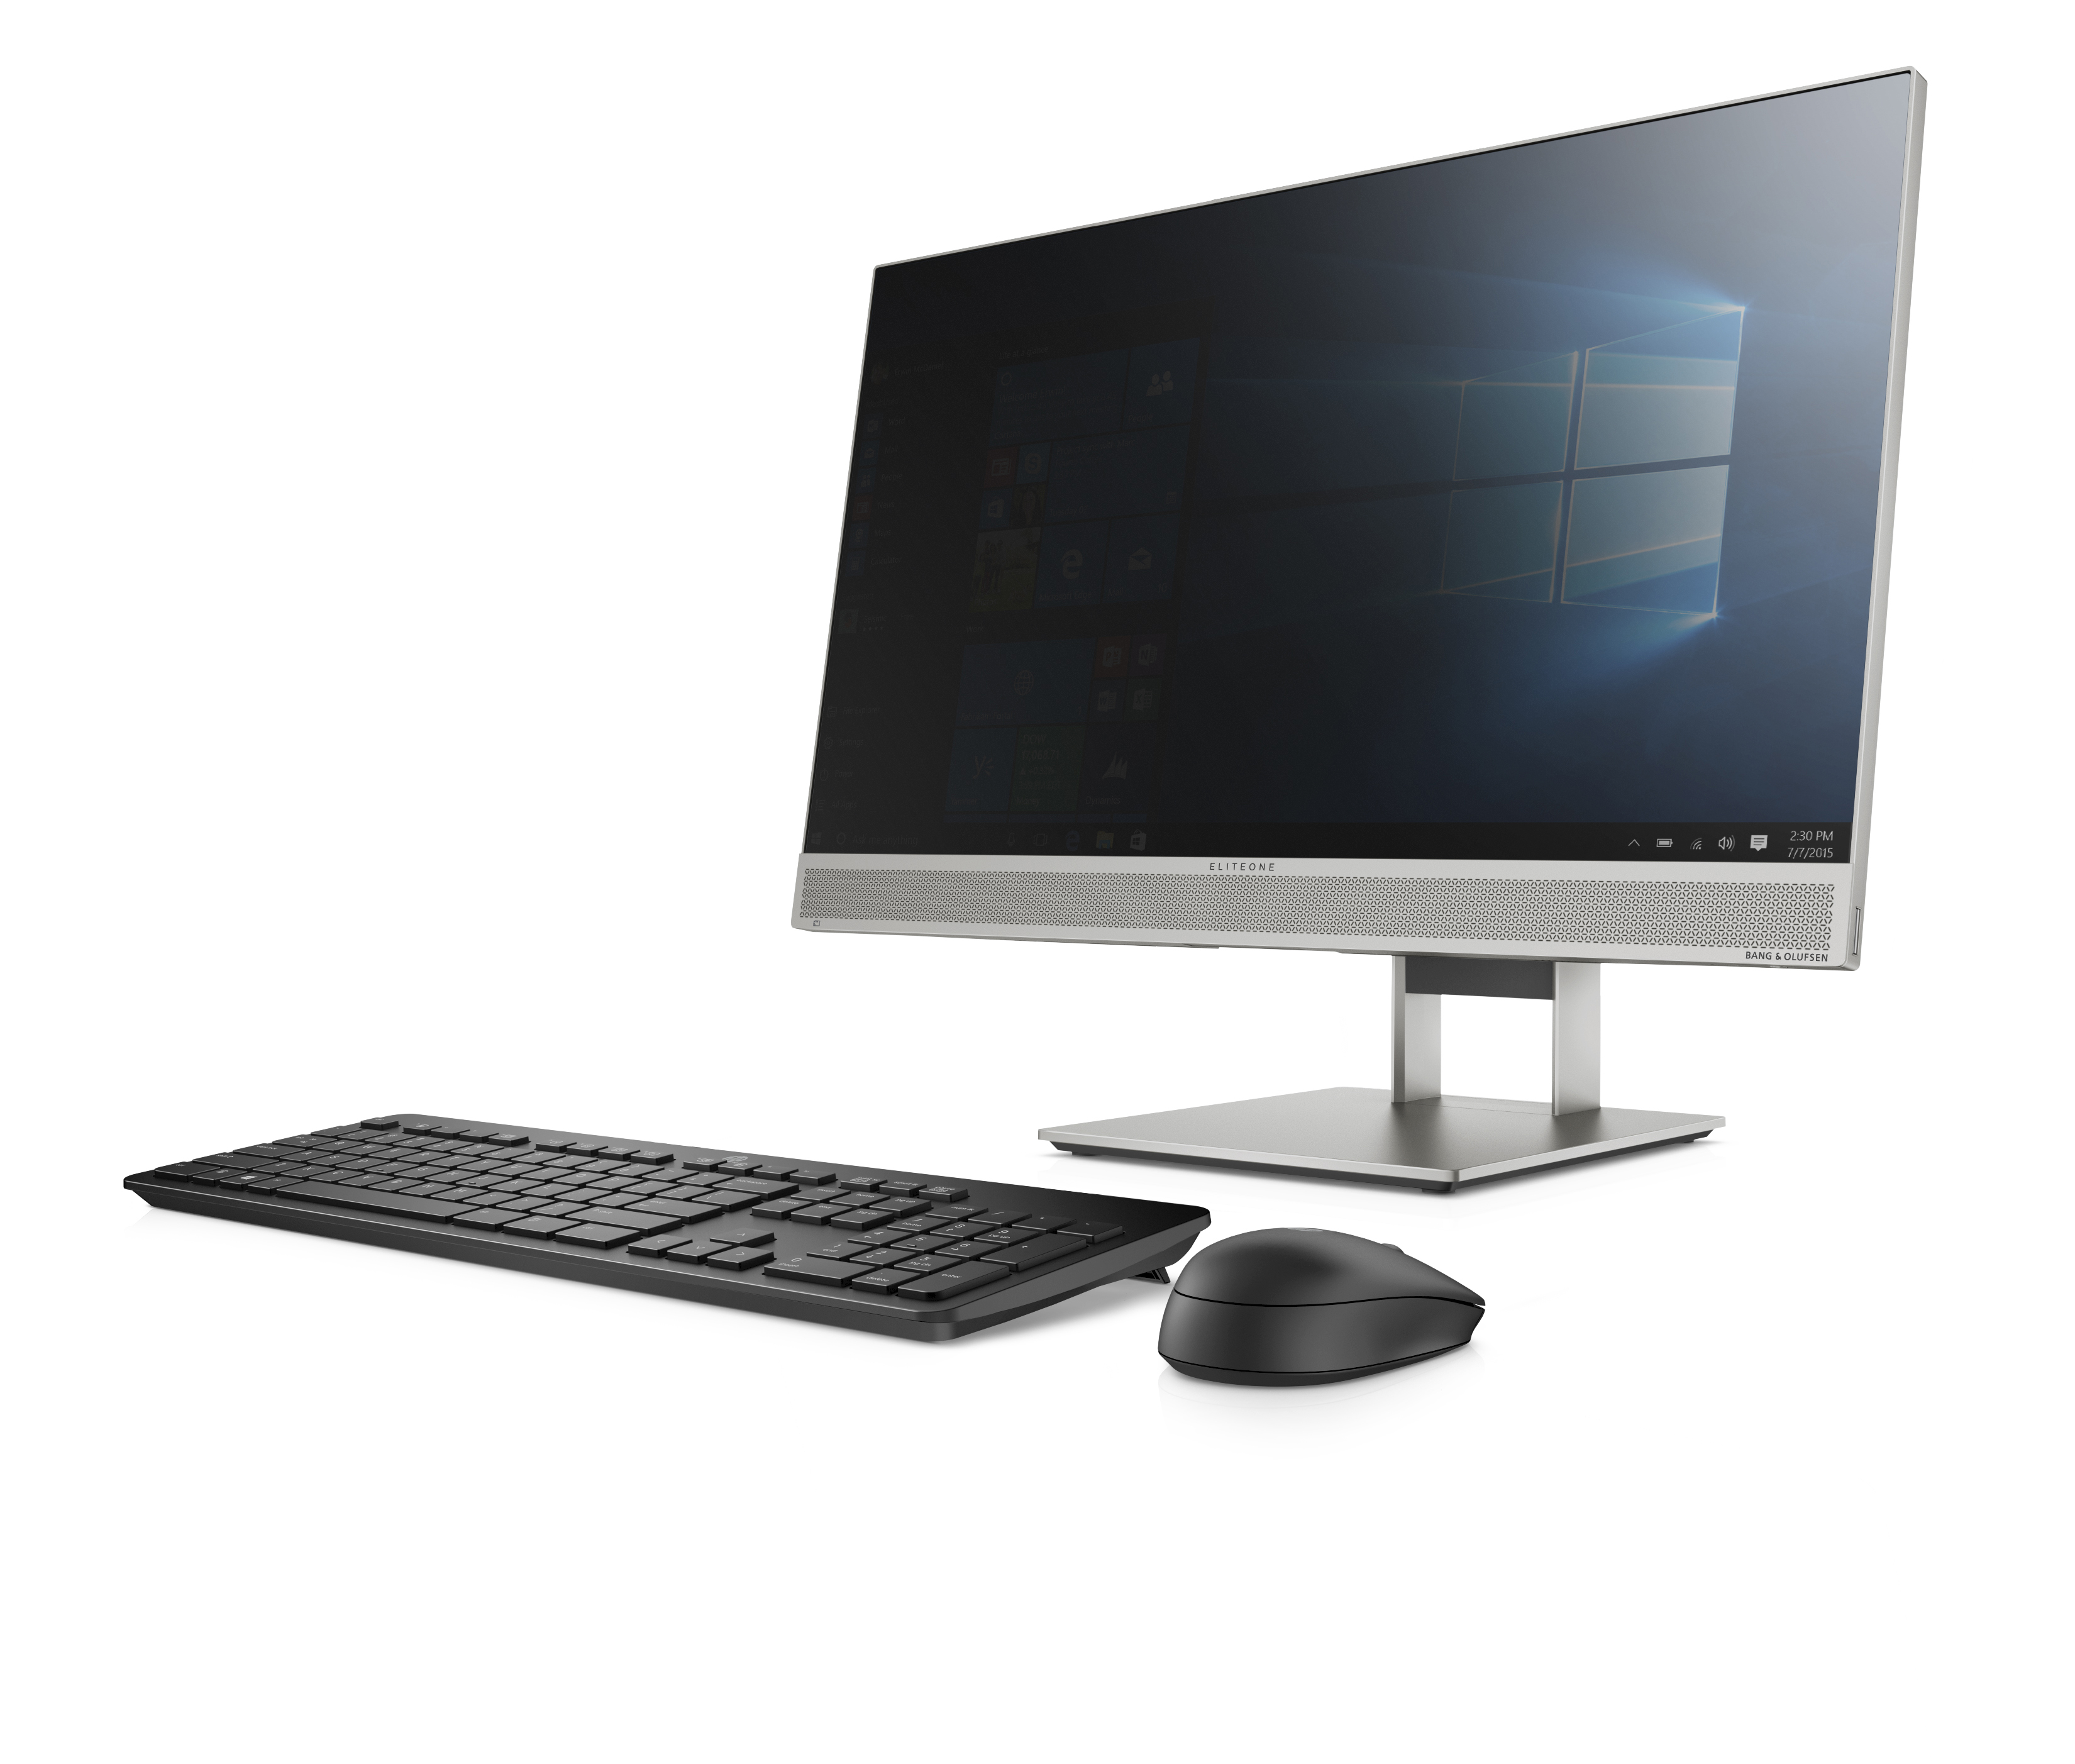 hp launches new monitors and all in one ces 2019 eliteone 800 g5 aio front left w sure view